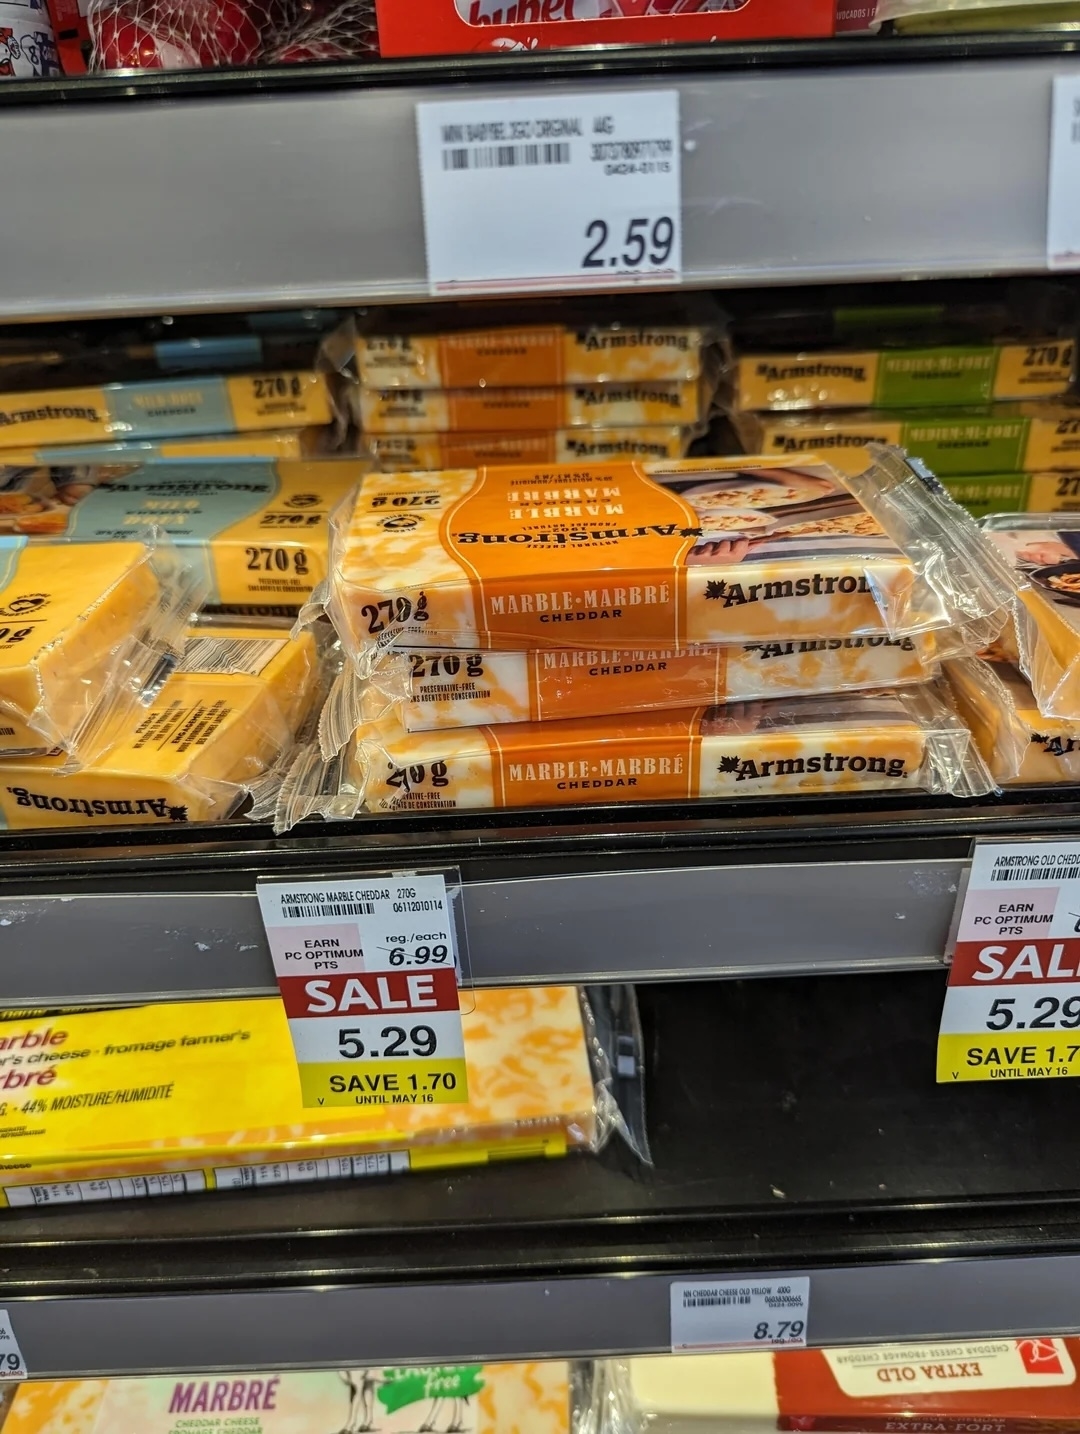 Packages of Armstrong Marble Cheese on store shelf with sale tags displaying reduced prices